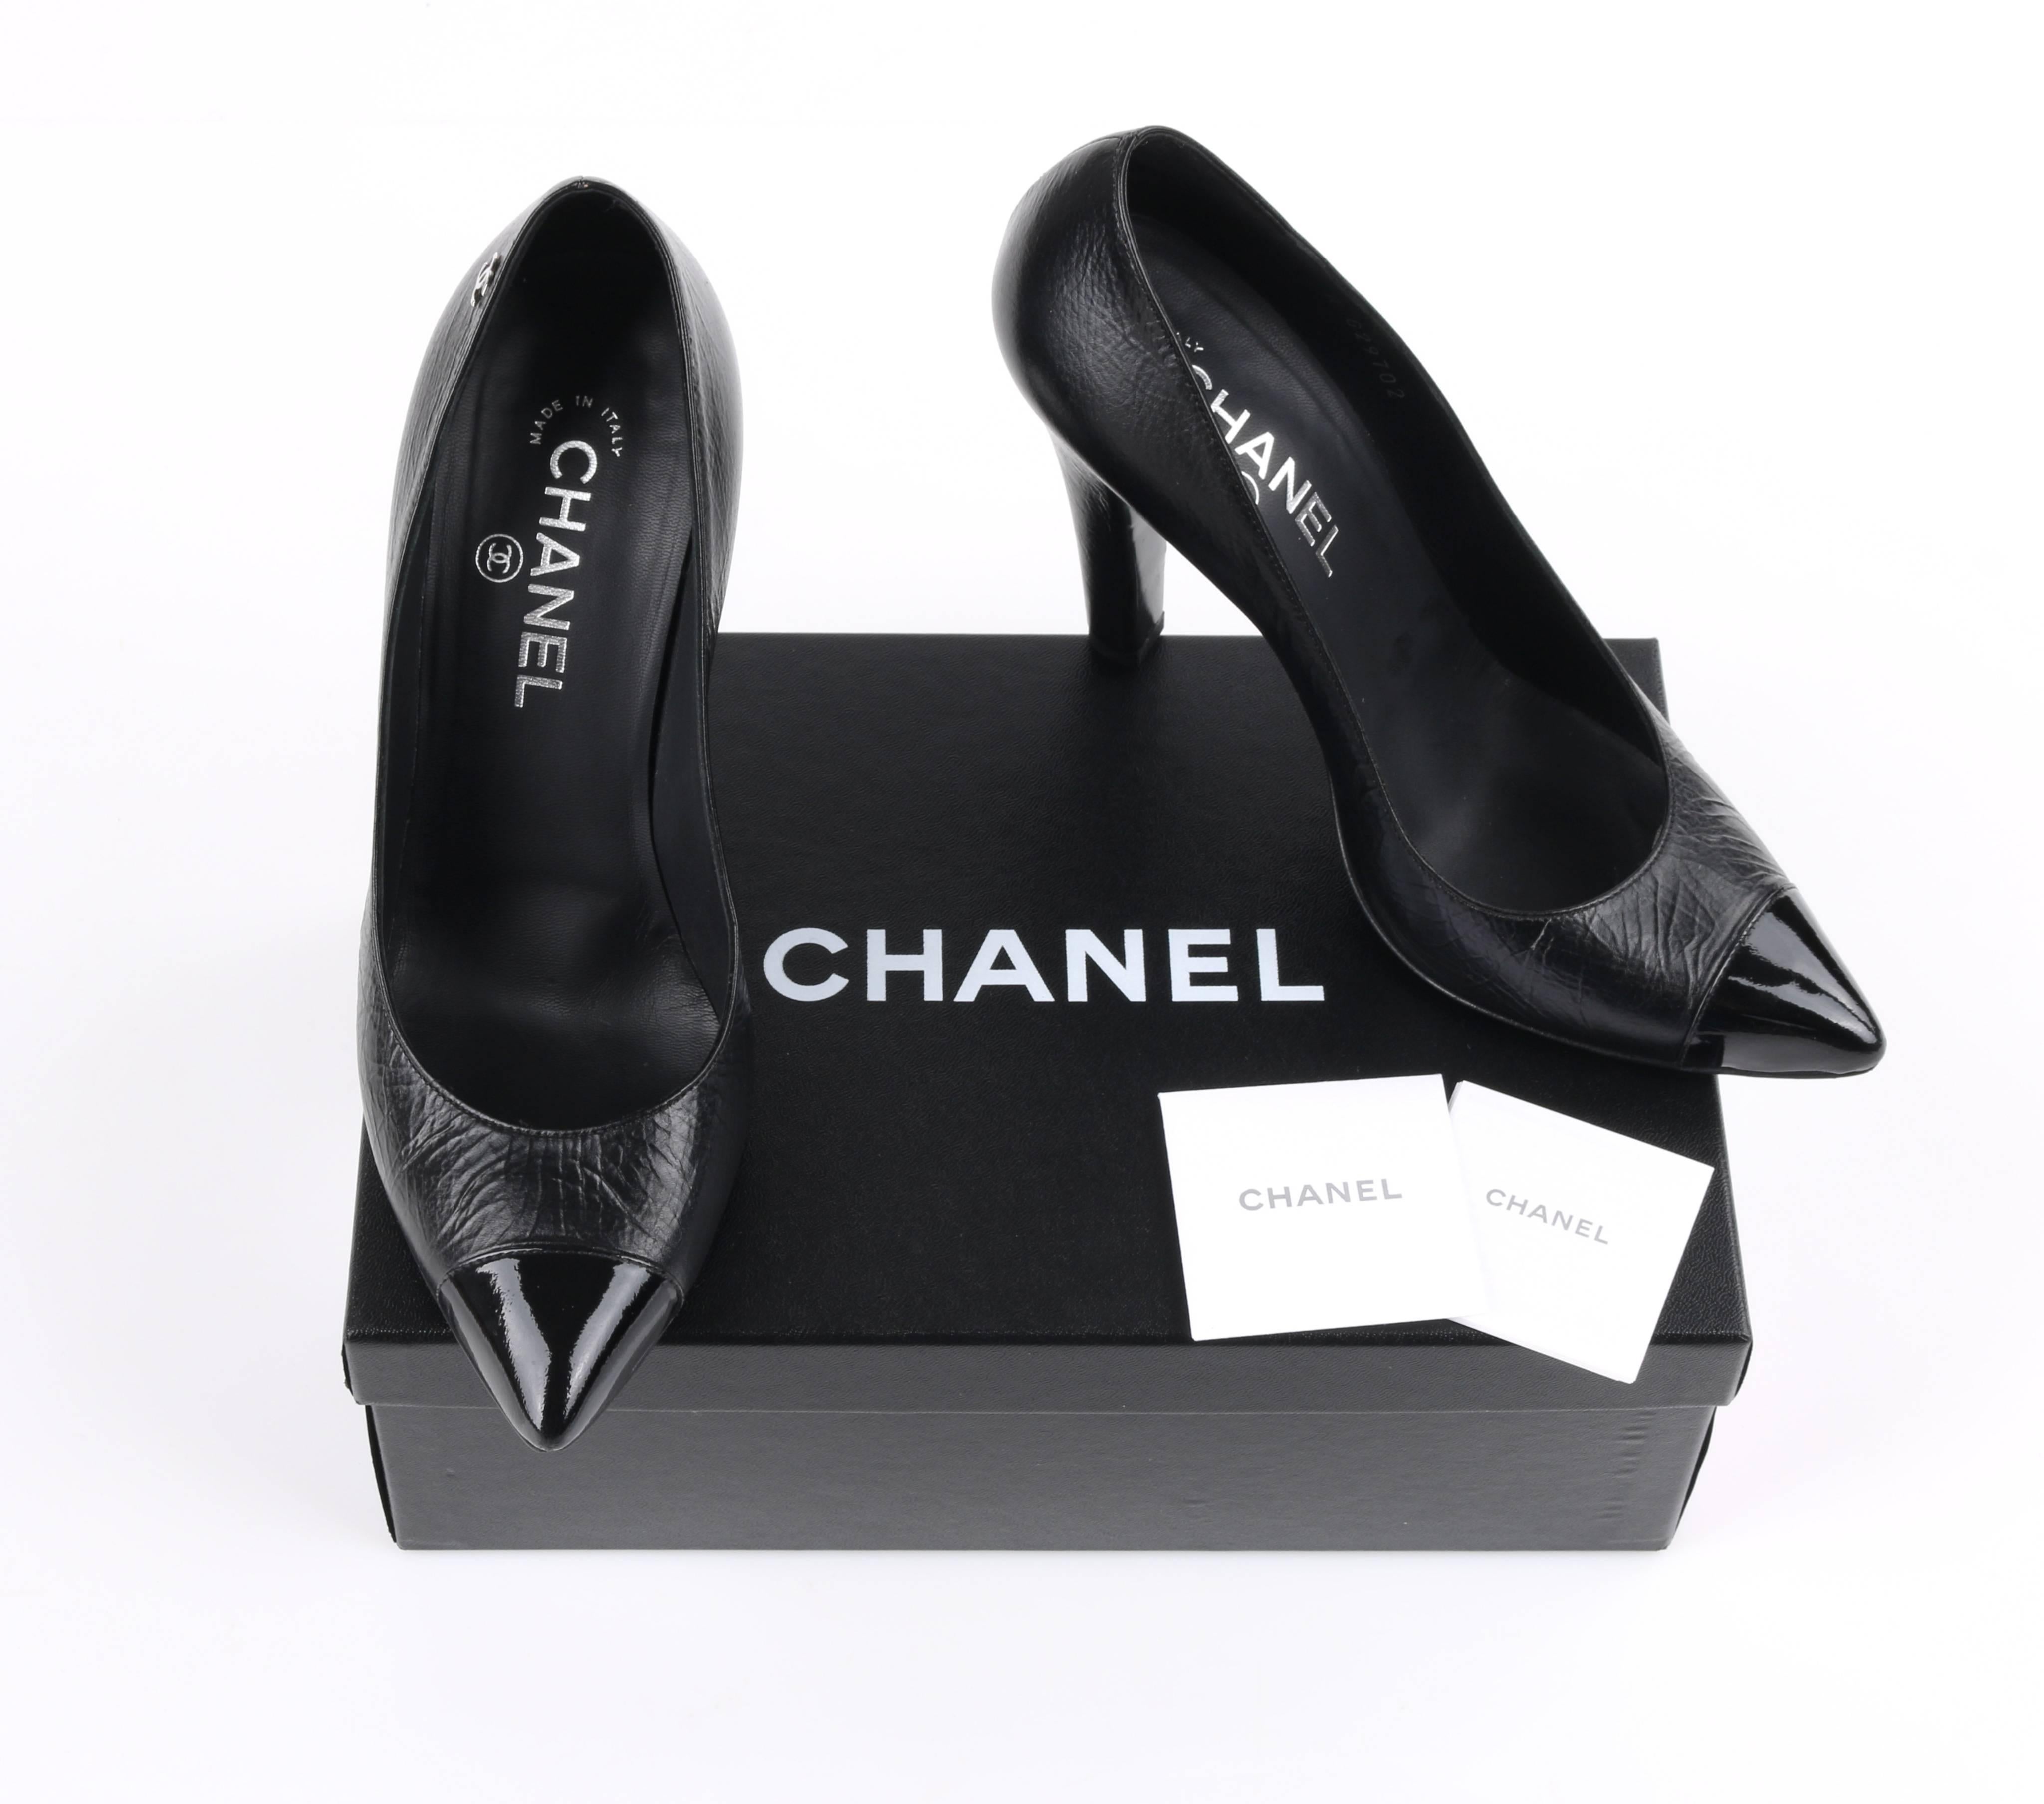 Chanel Cruise 2014 black textured (crinkle) leather pointed cap toe pumps. Designed by Karl Lagerfeld. Black texturized leather upper. Silver-toned metal 